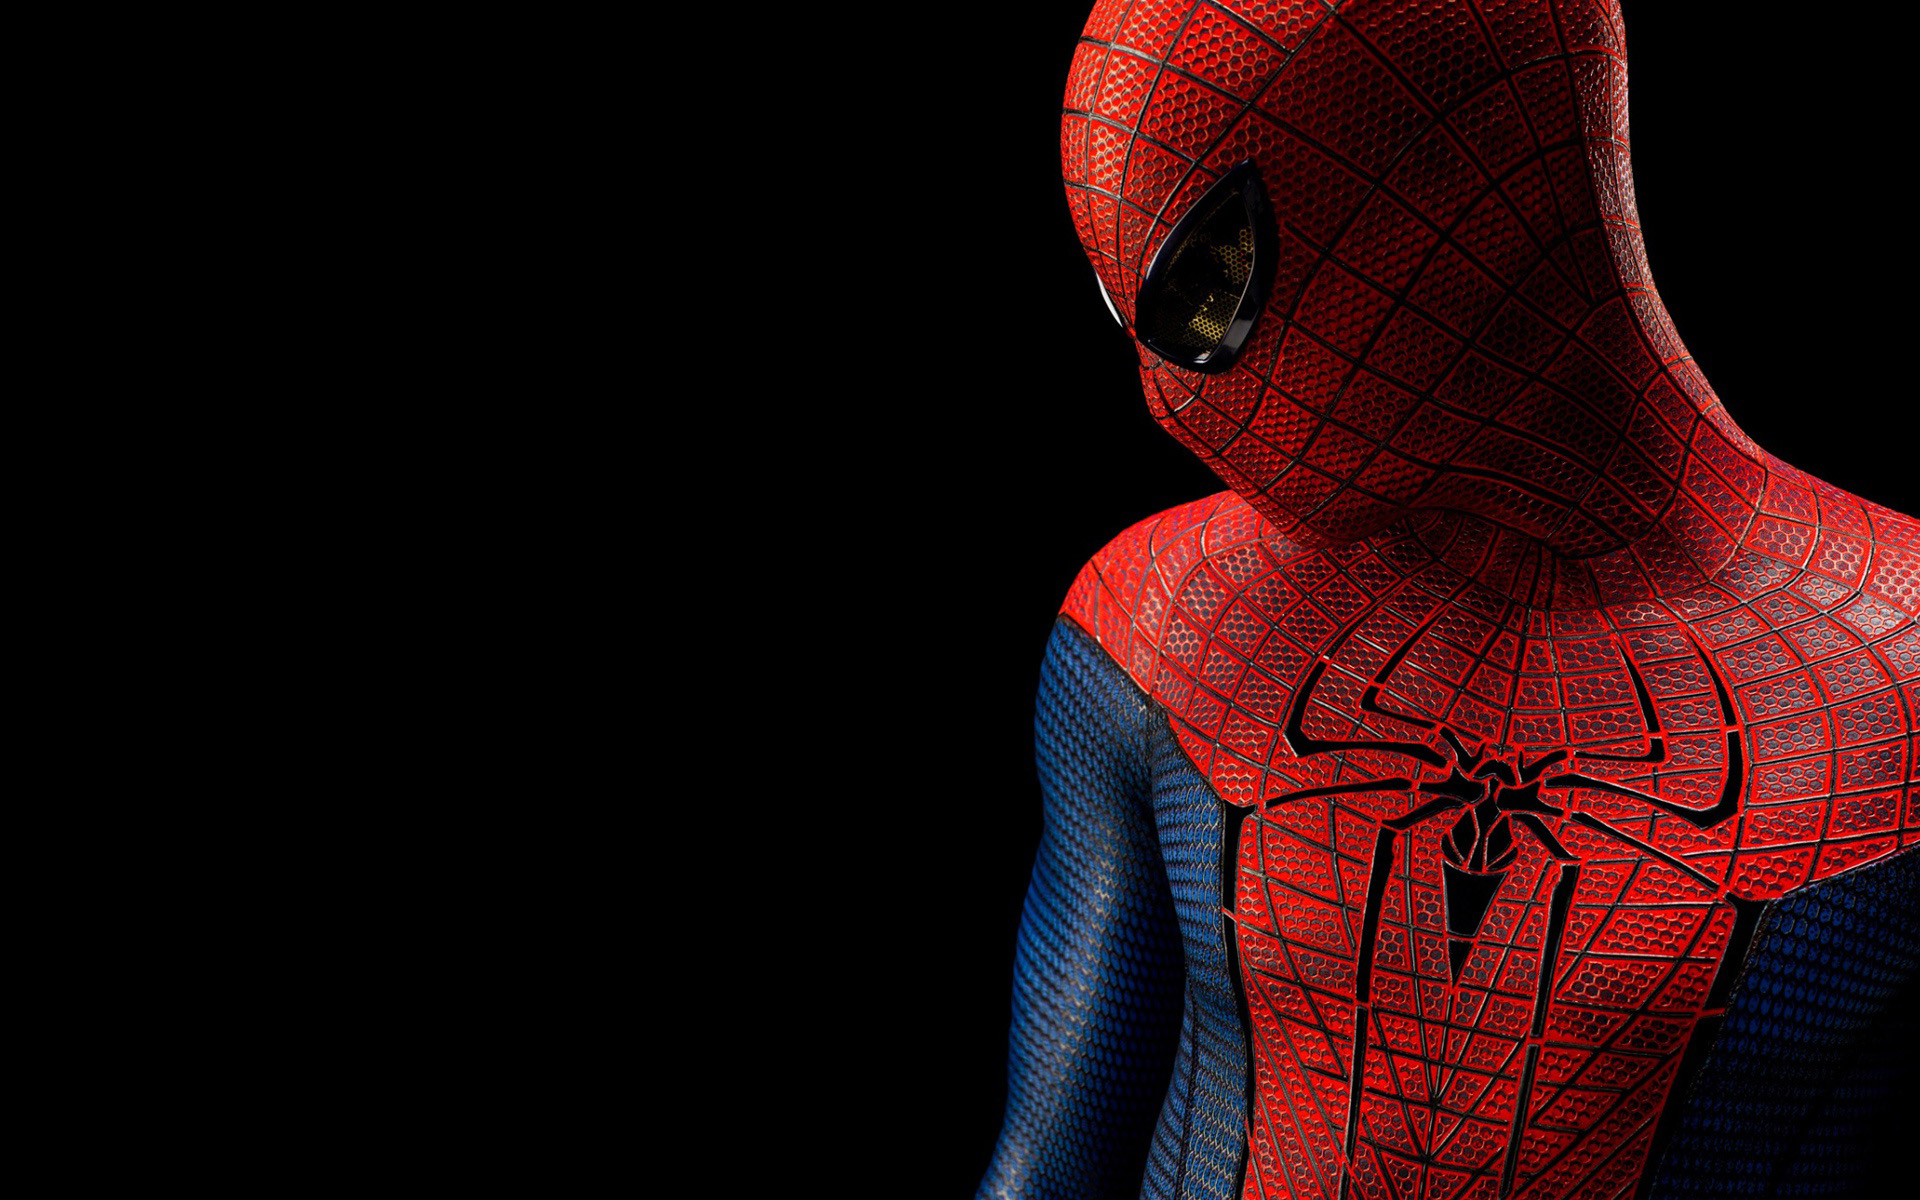  desktop galaxy backgrounds covers spiderman spider man 1920x1200